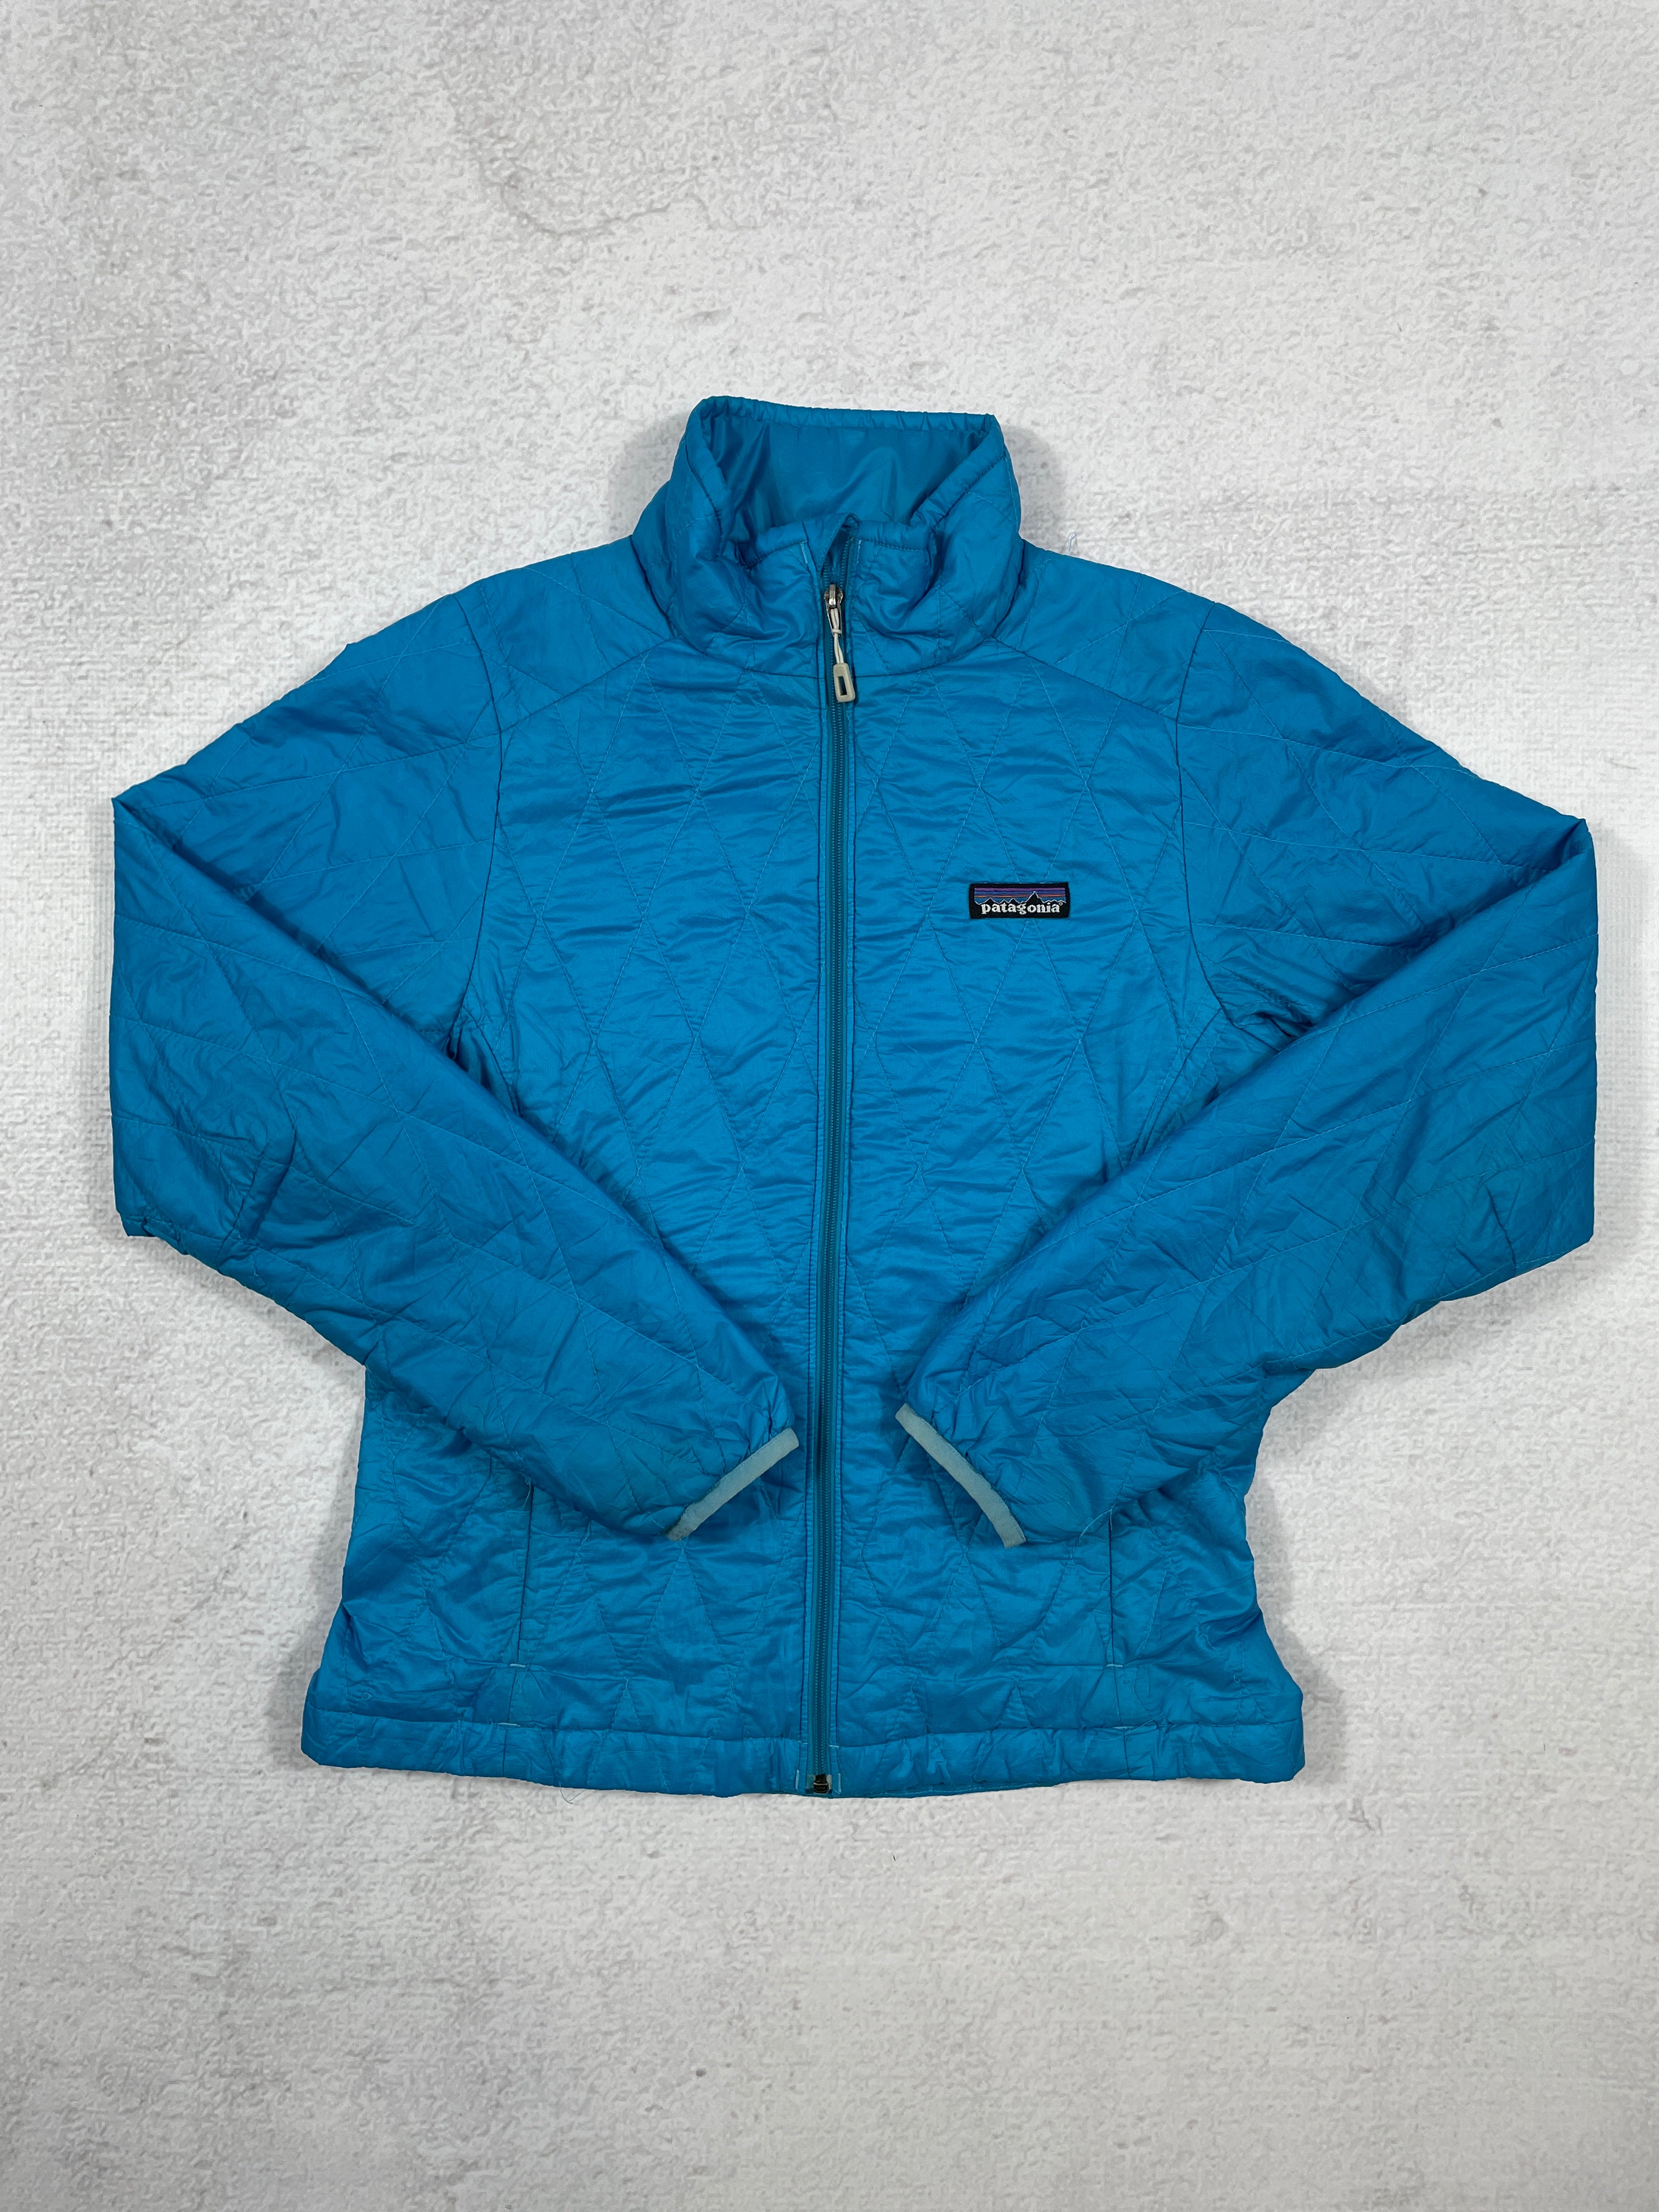 Vintage Patagonia Insulated Jacket - Women's XS